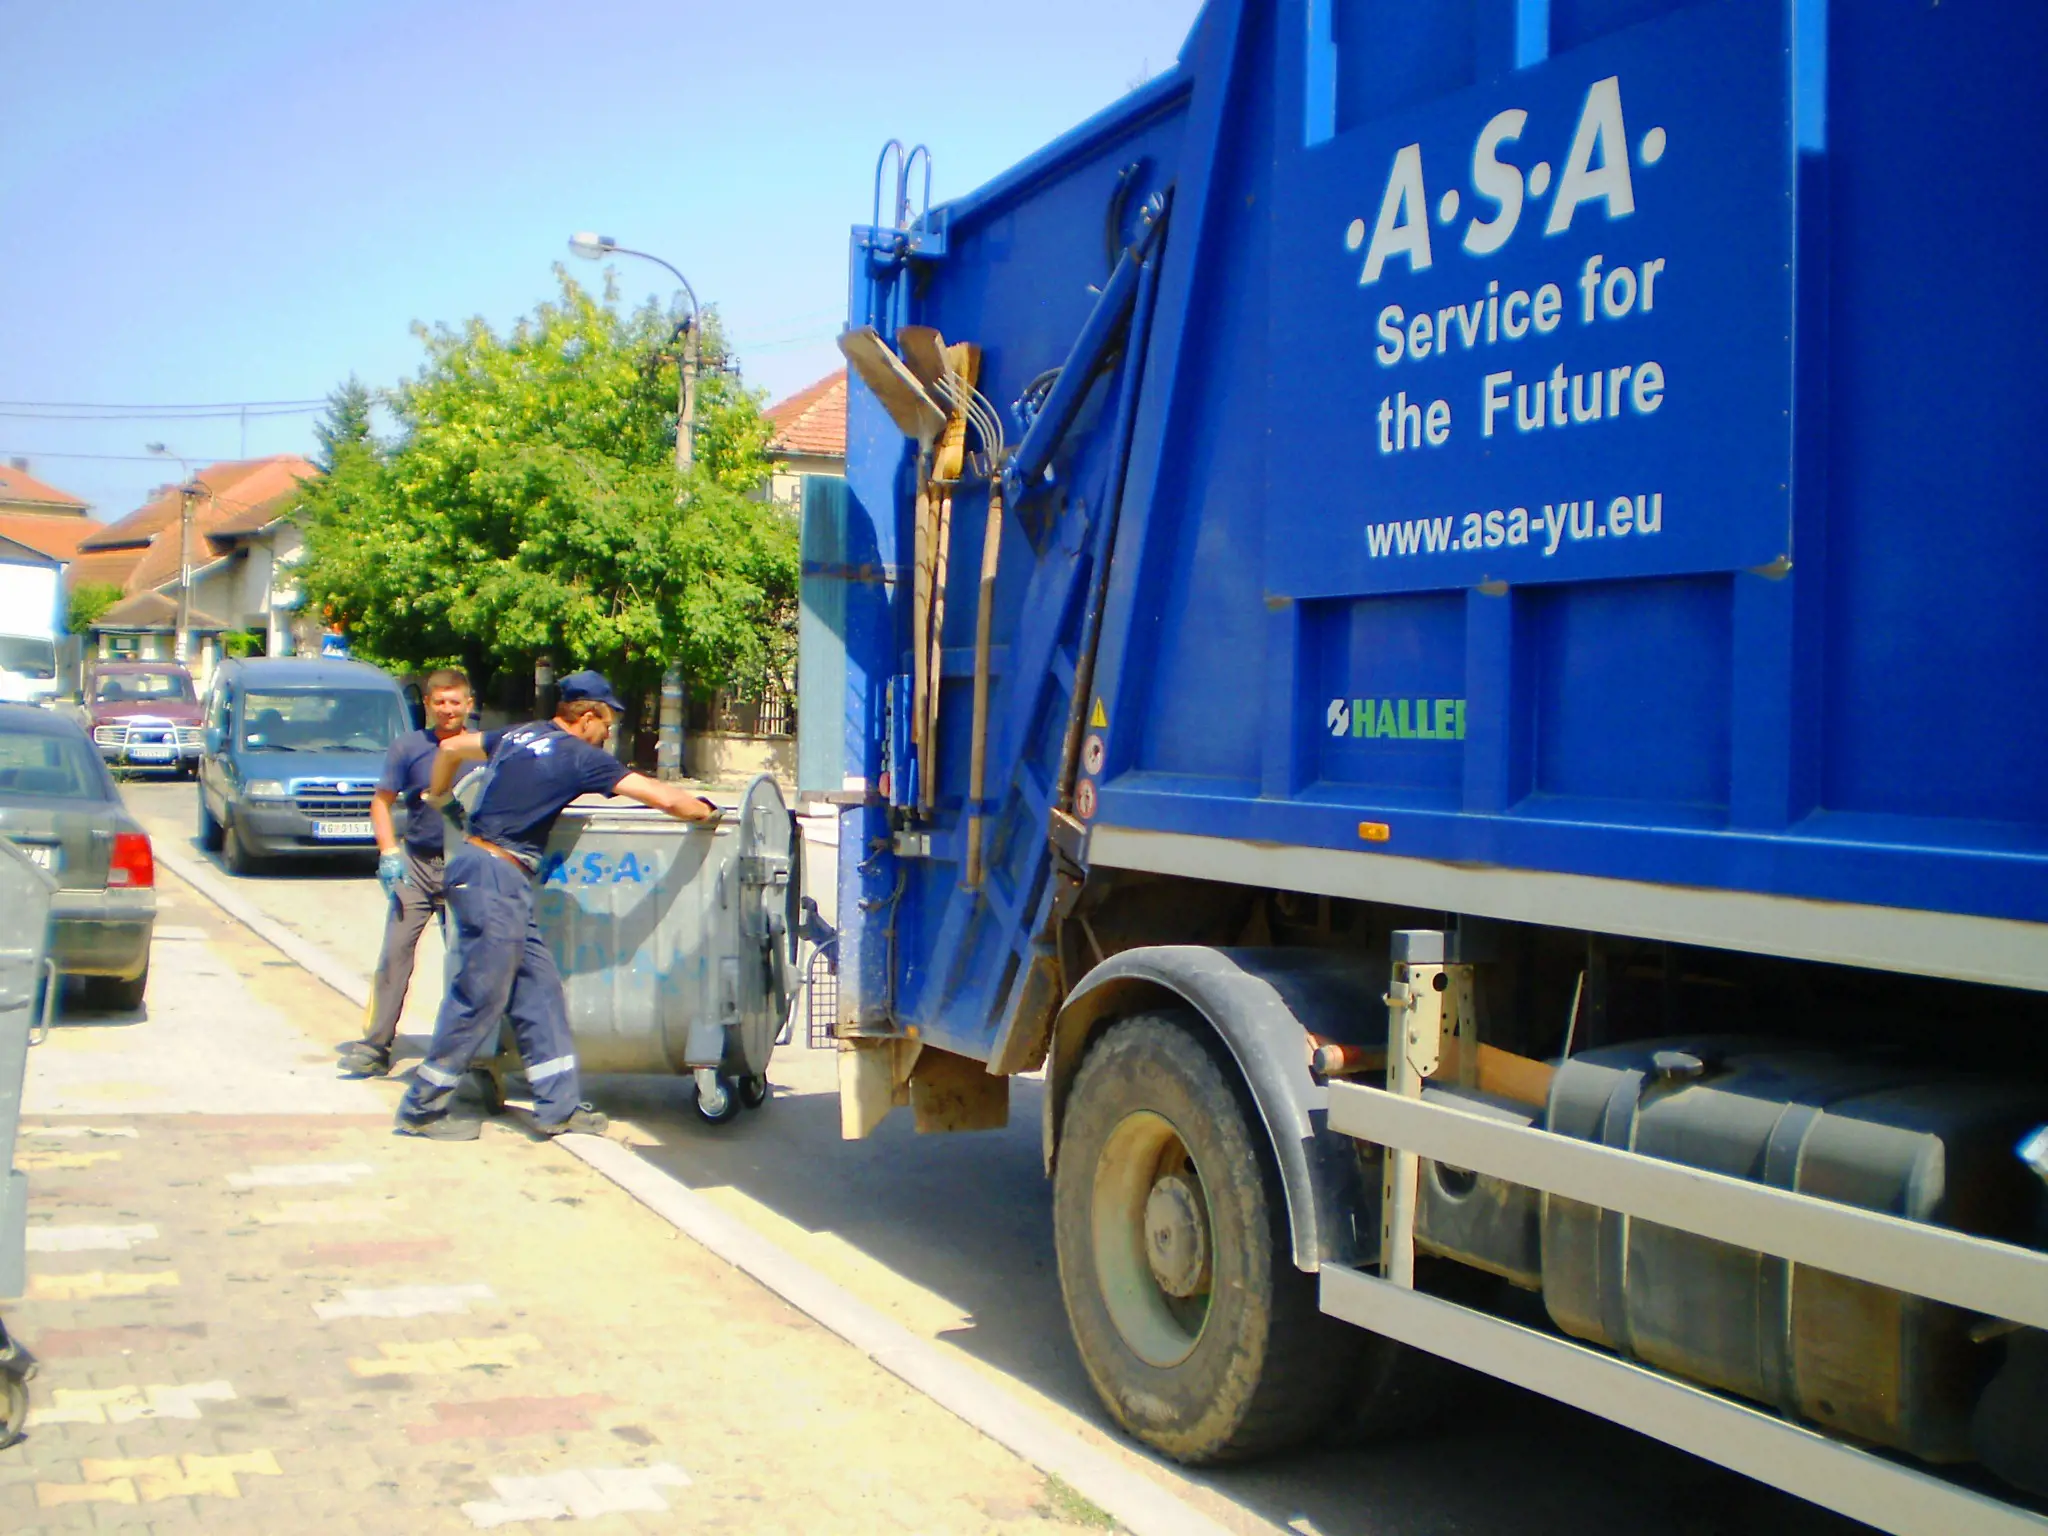 .A.S.A. started activities of collection of waste in Žabari 